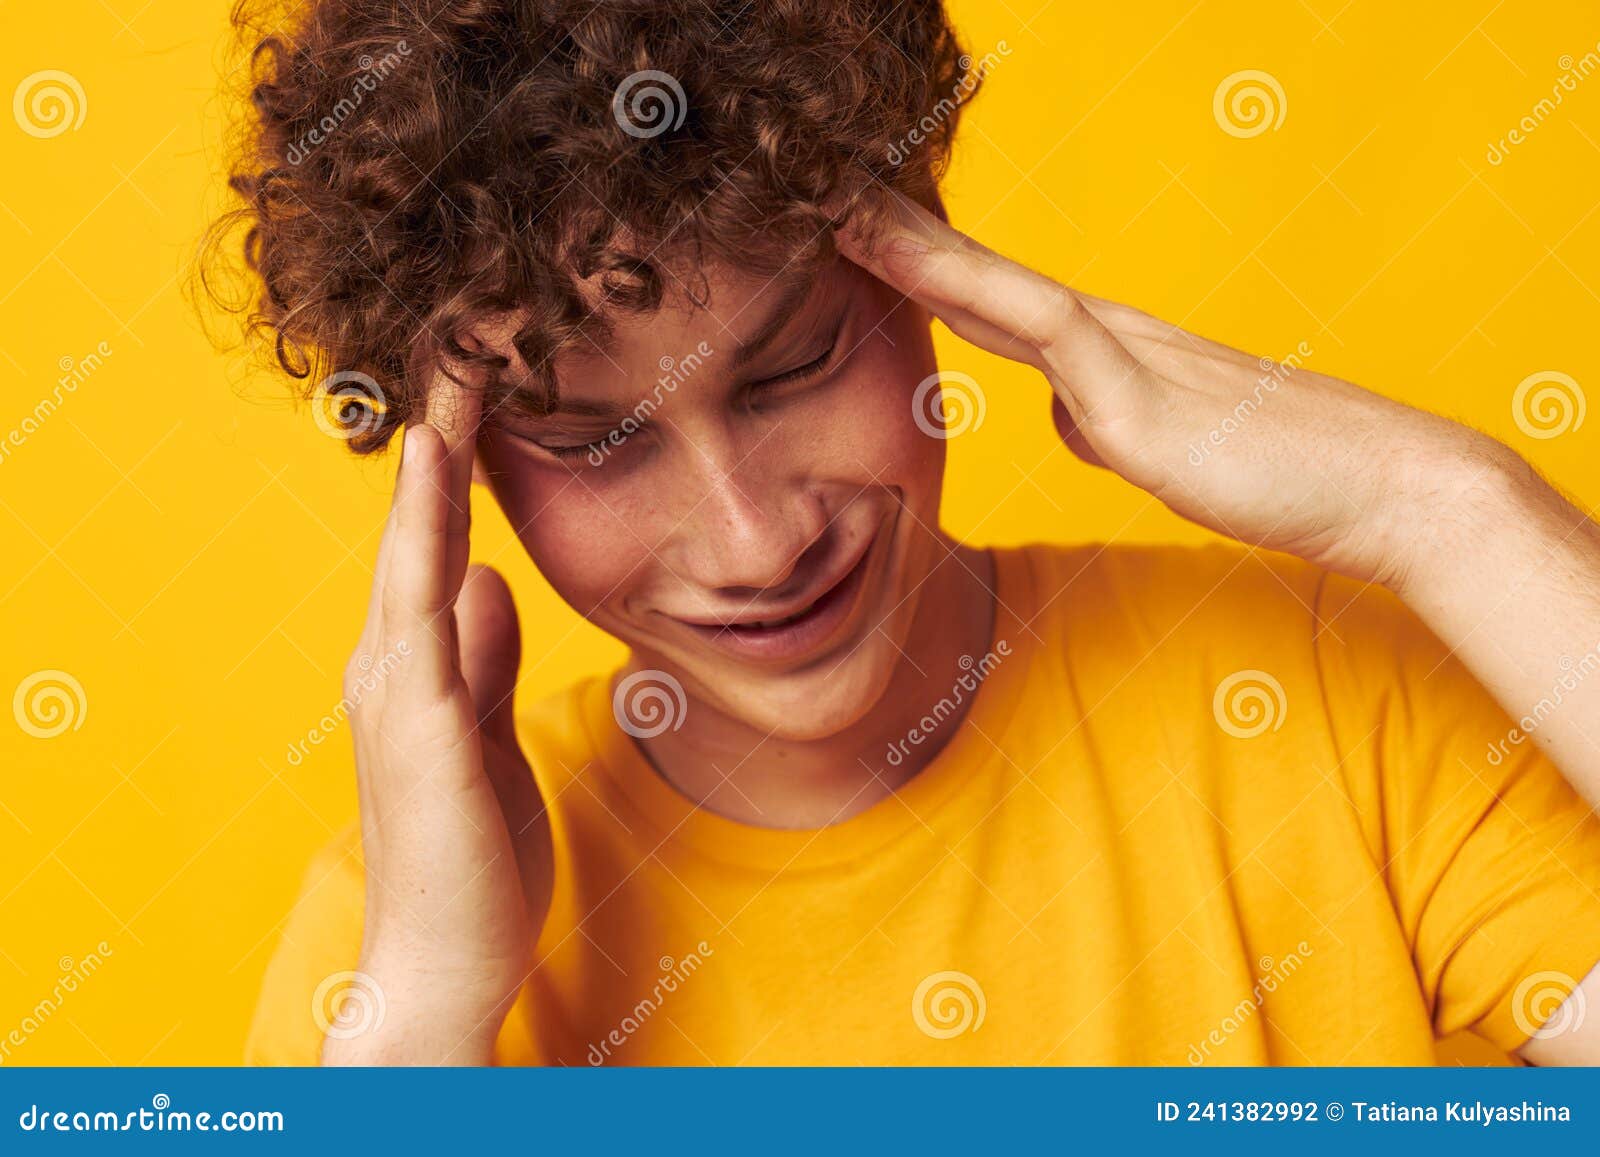 Curly Hair on a Guy with Blonde Hair - wide 2